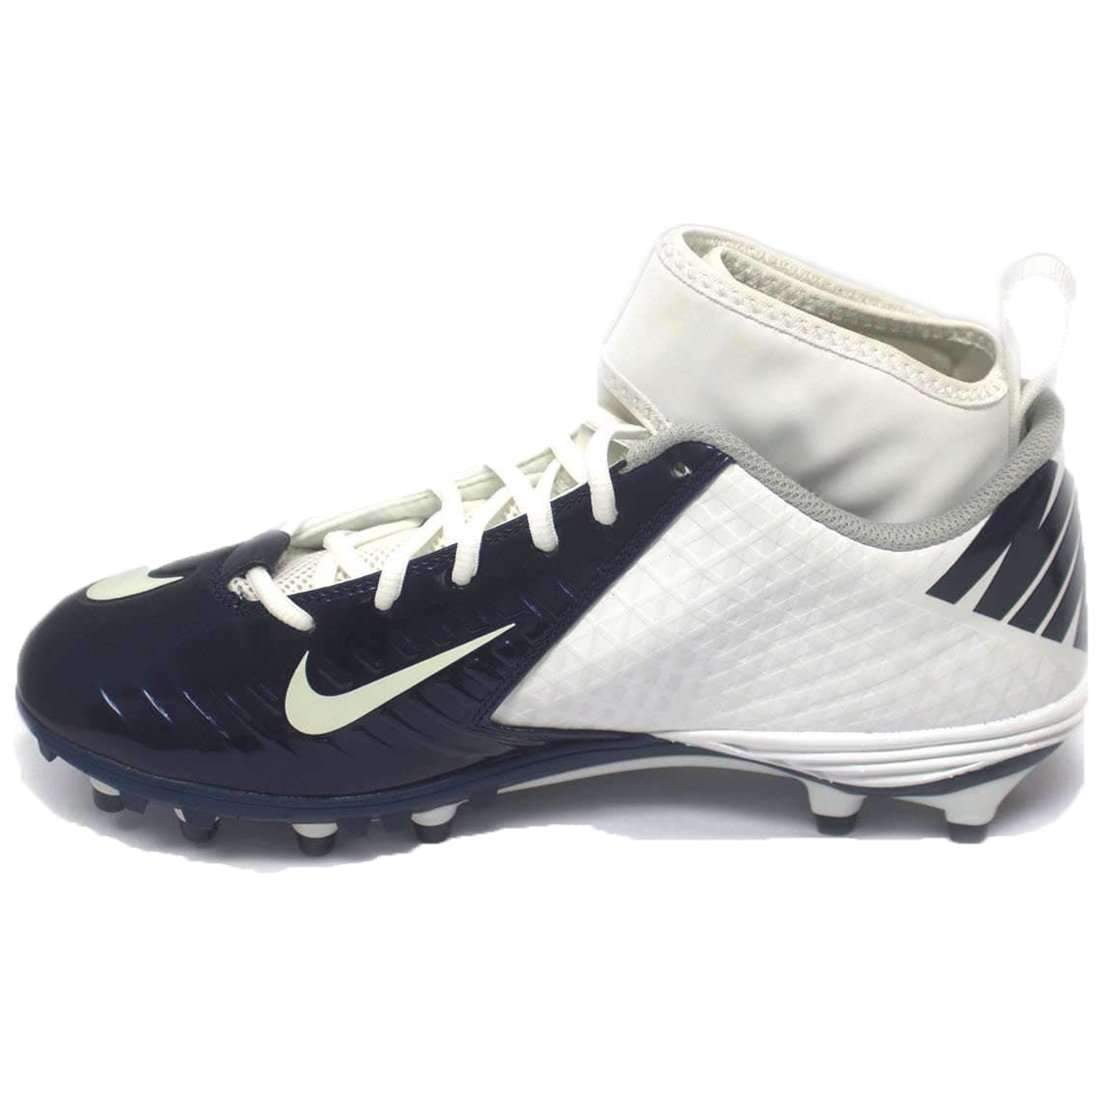 nike superbad cleats 2012